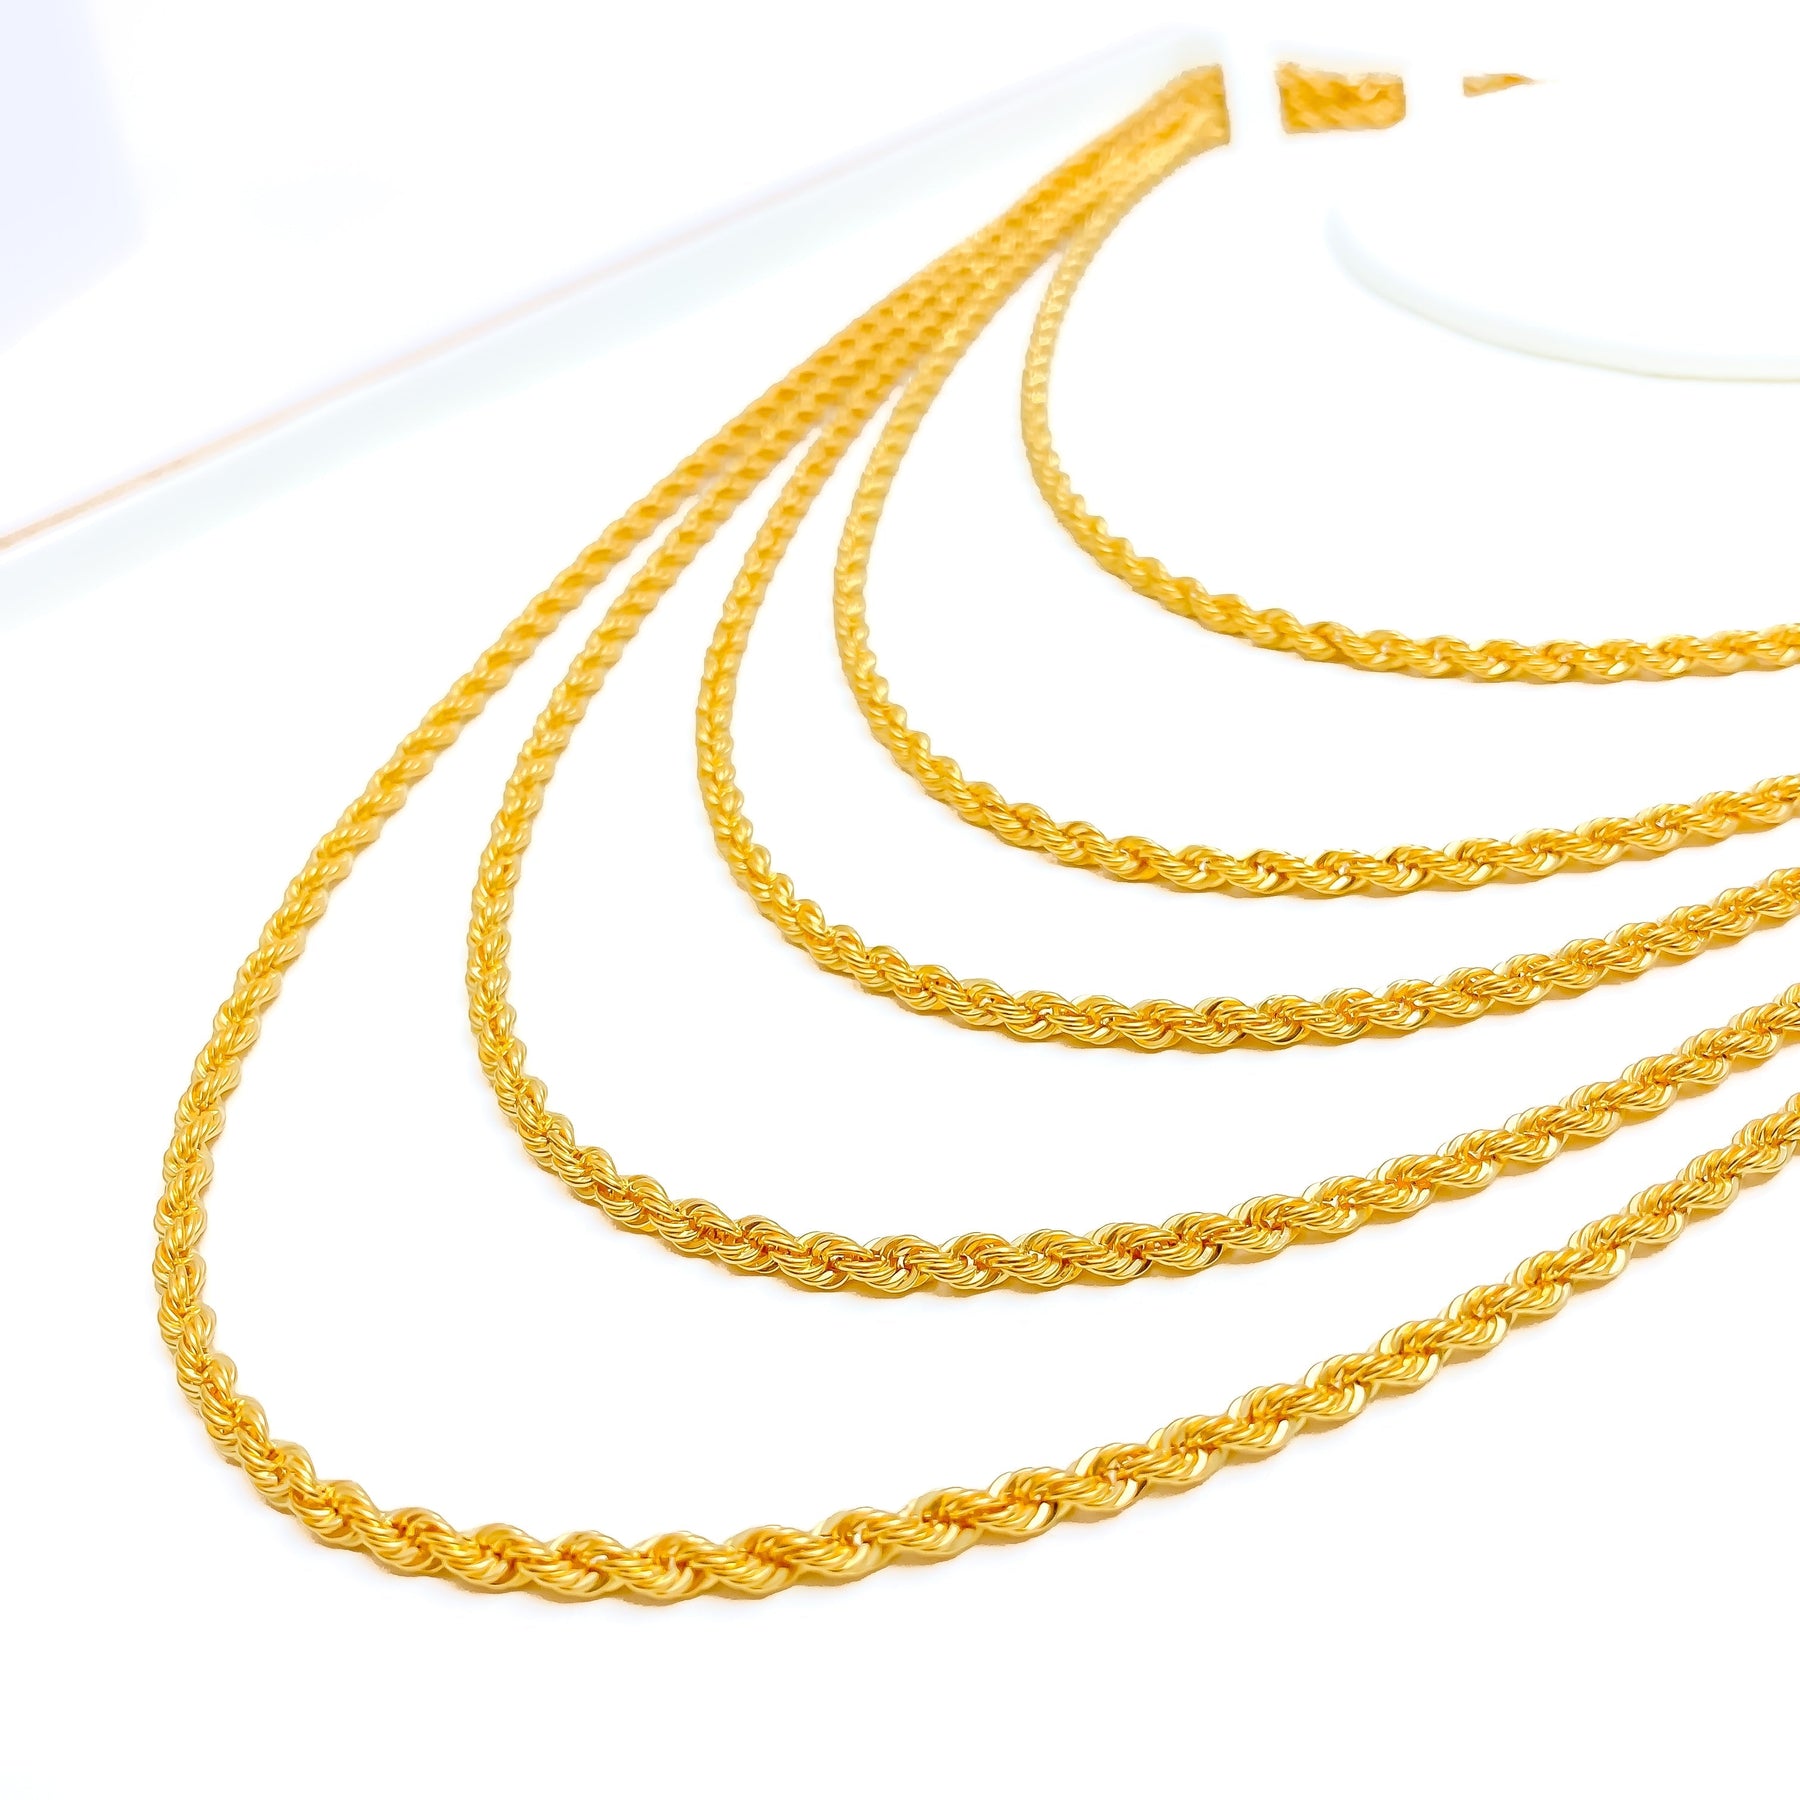 Radiant Textured 22K Gold Beaded Chain - 25